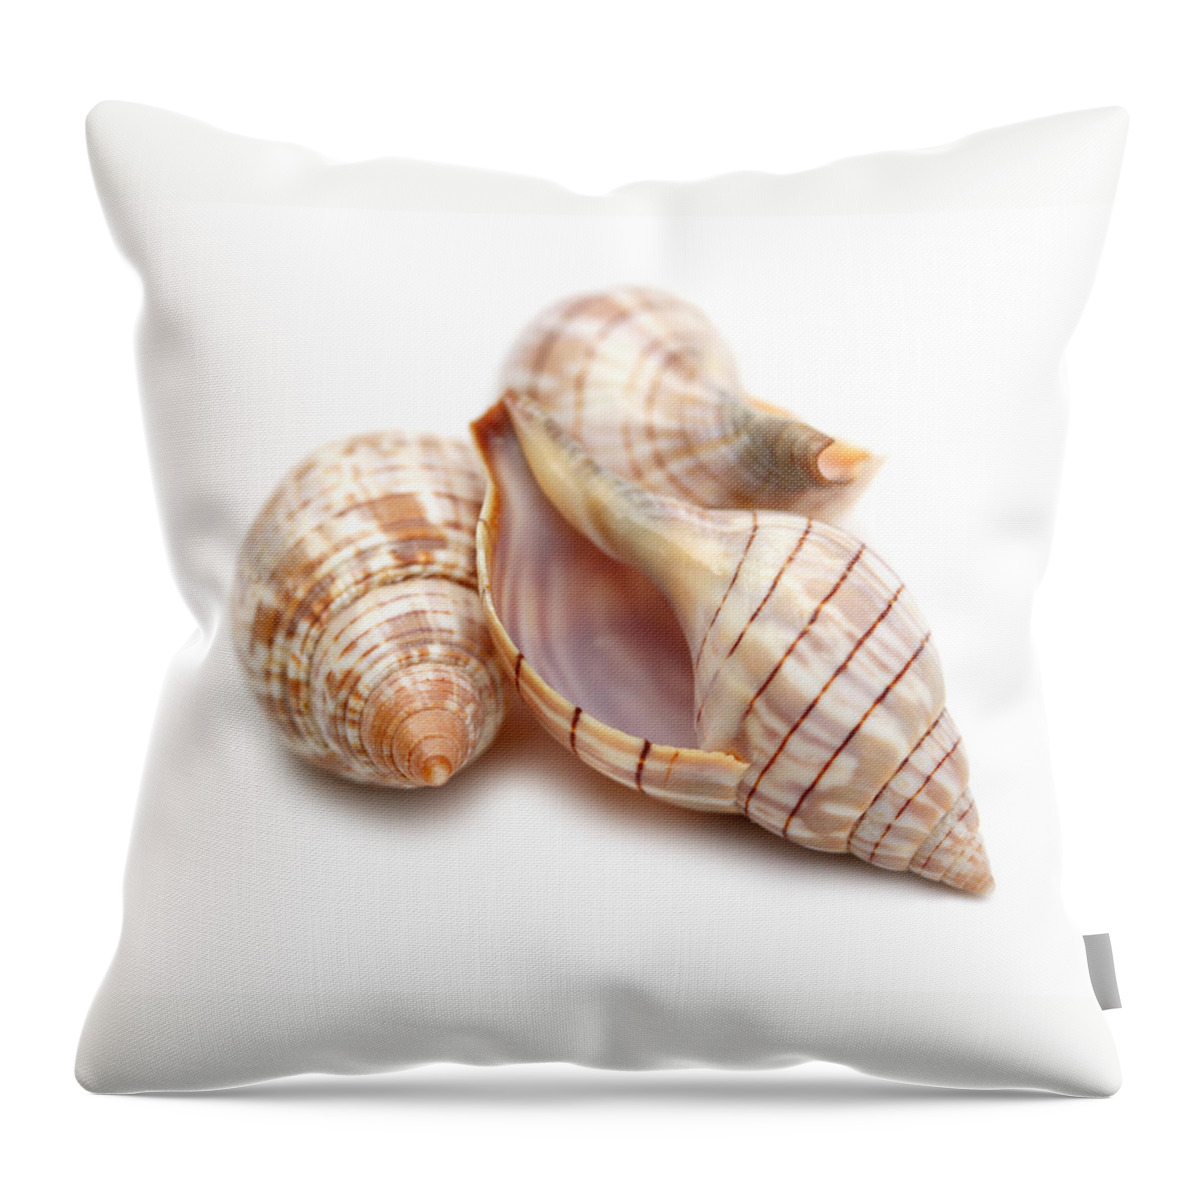 Banded Tulip Shell Throw Pillow featuring the photograph Banded Tulip Seashells Macro by Jennie Marie Schell